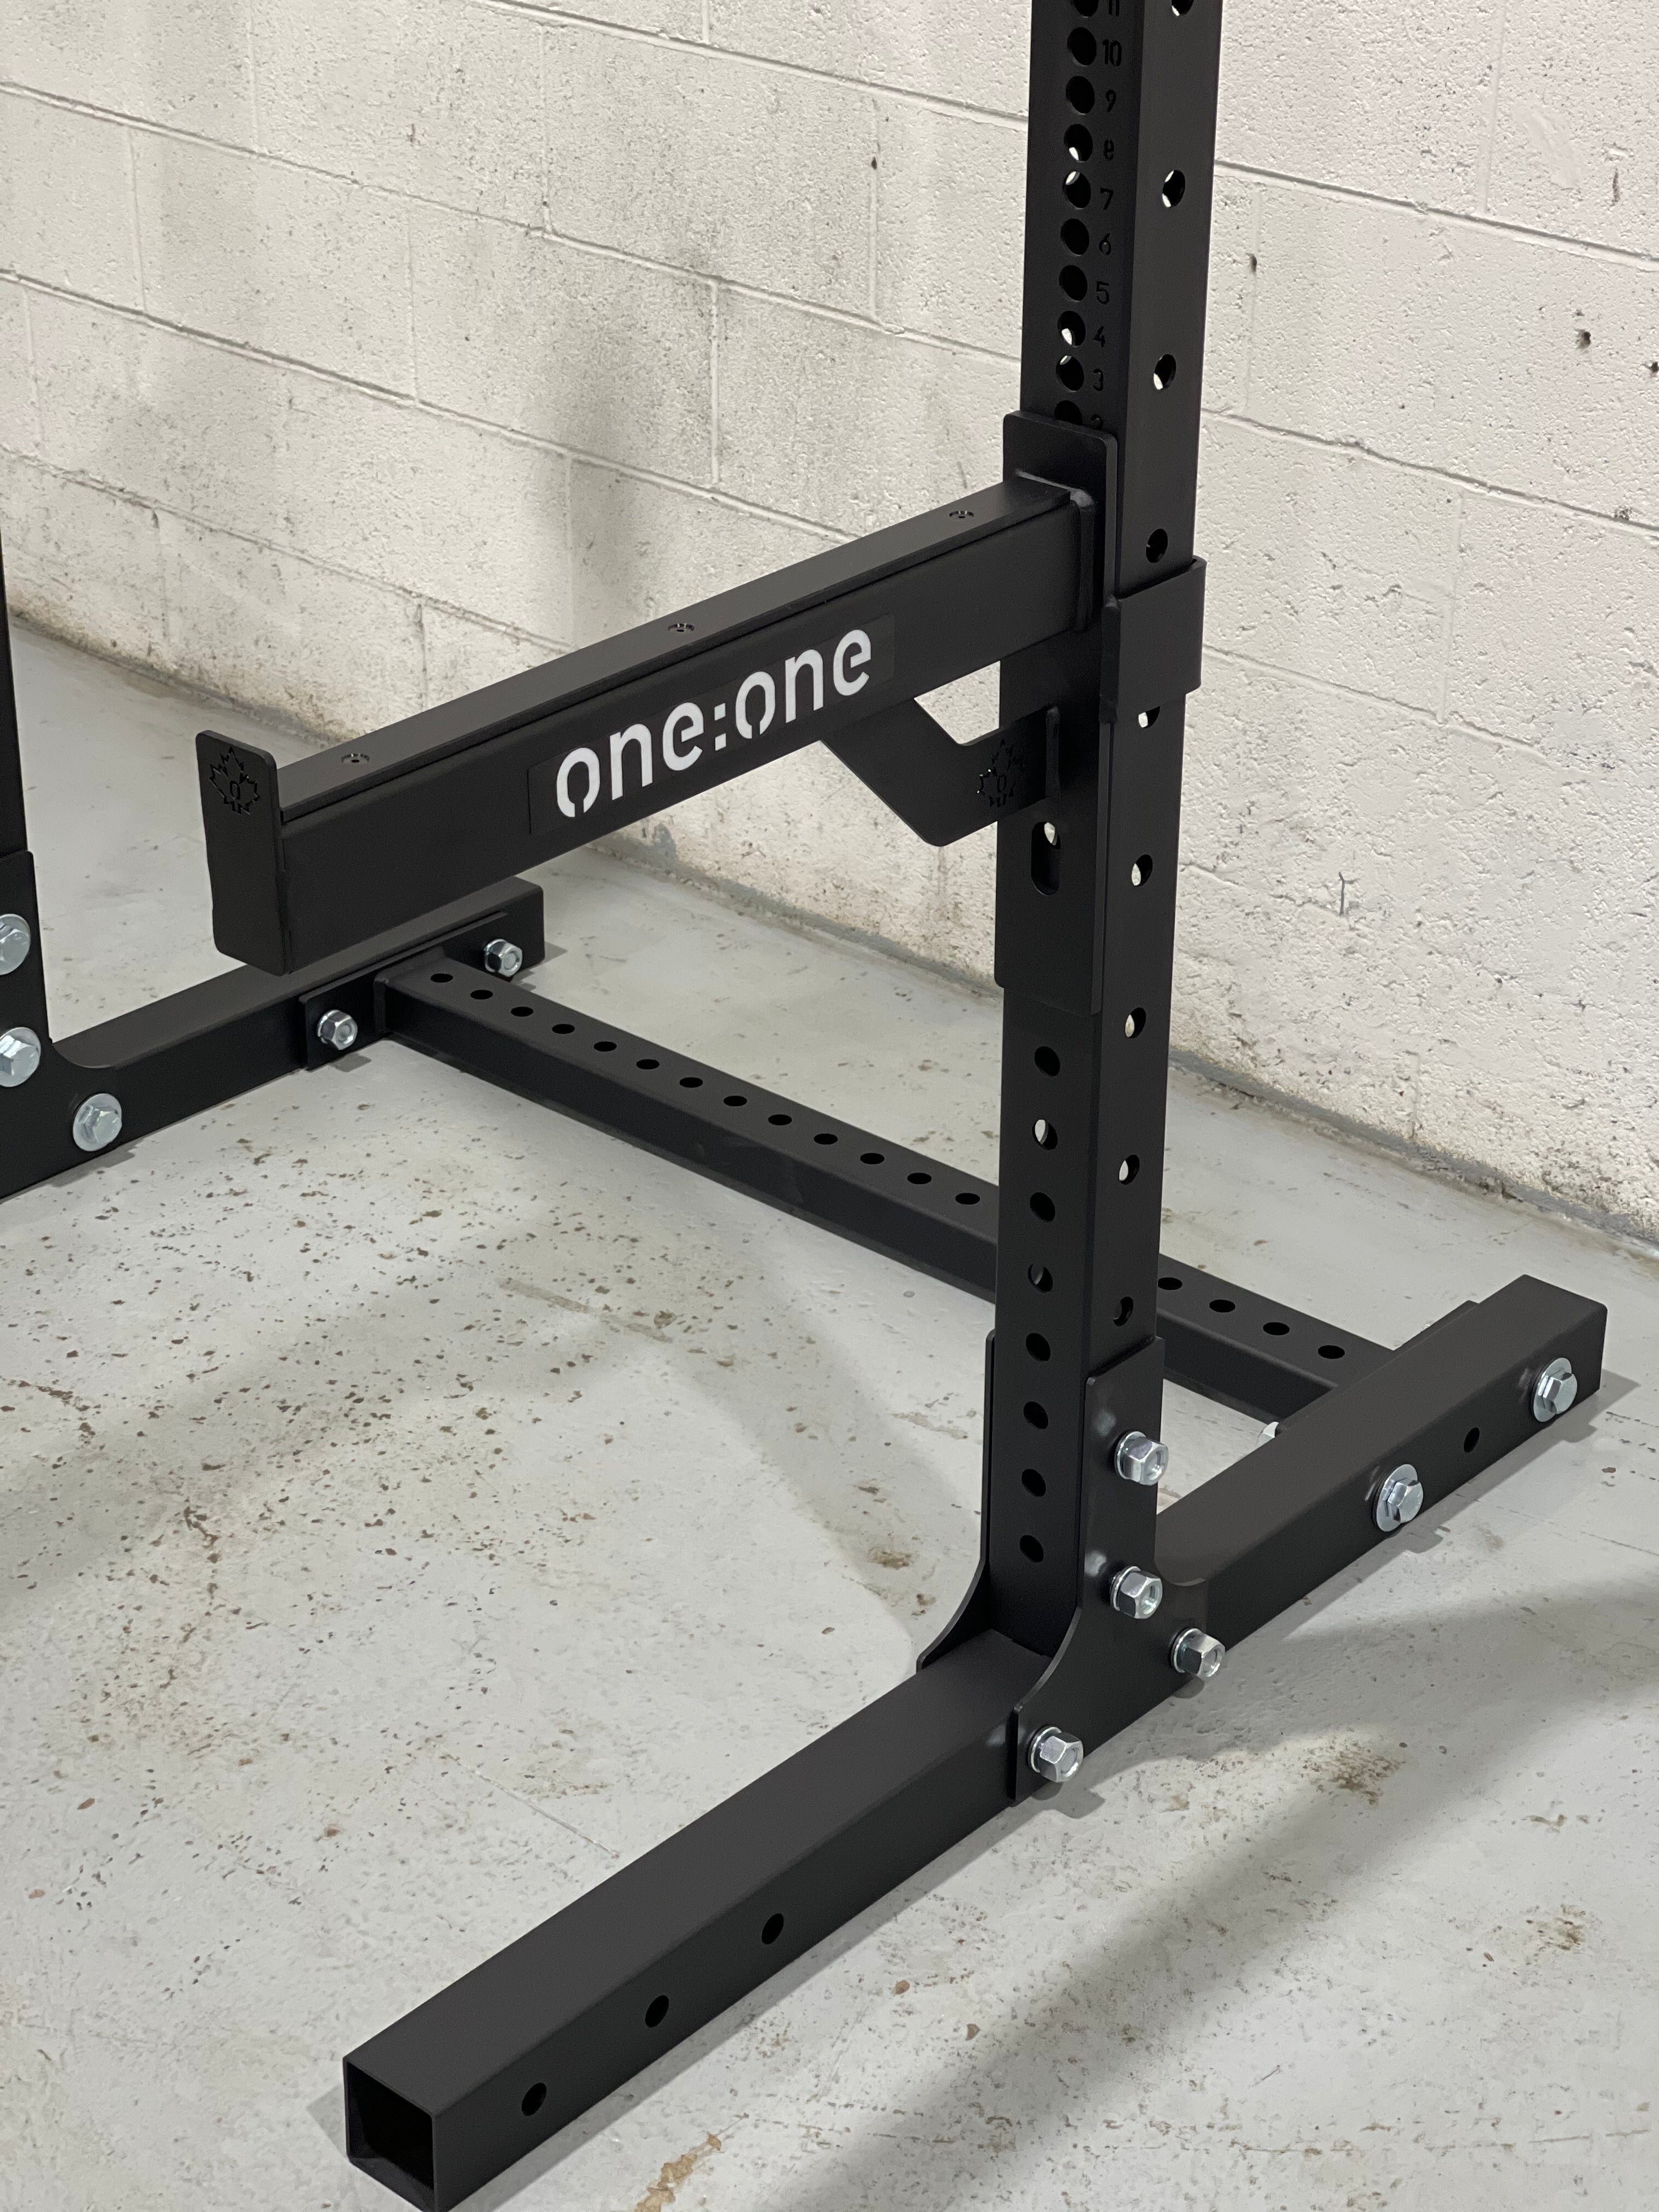 The One:One Fitness Safety Arm: because safety is a top priority.